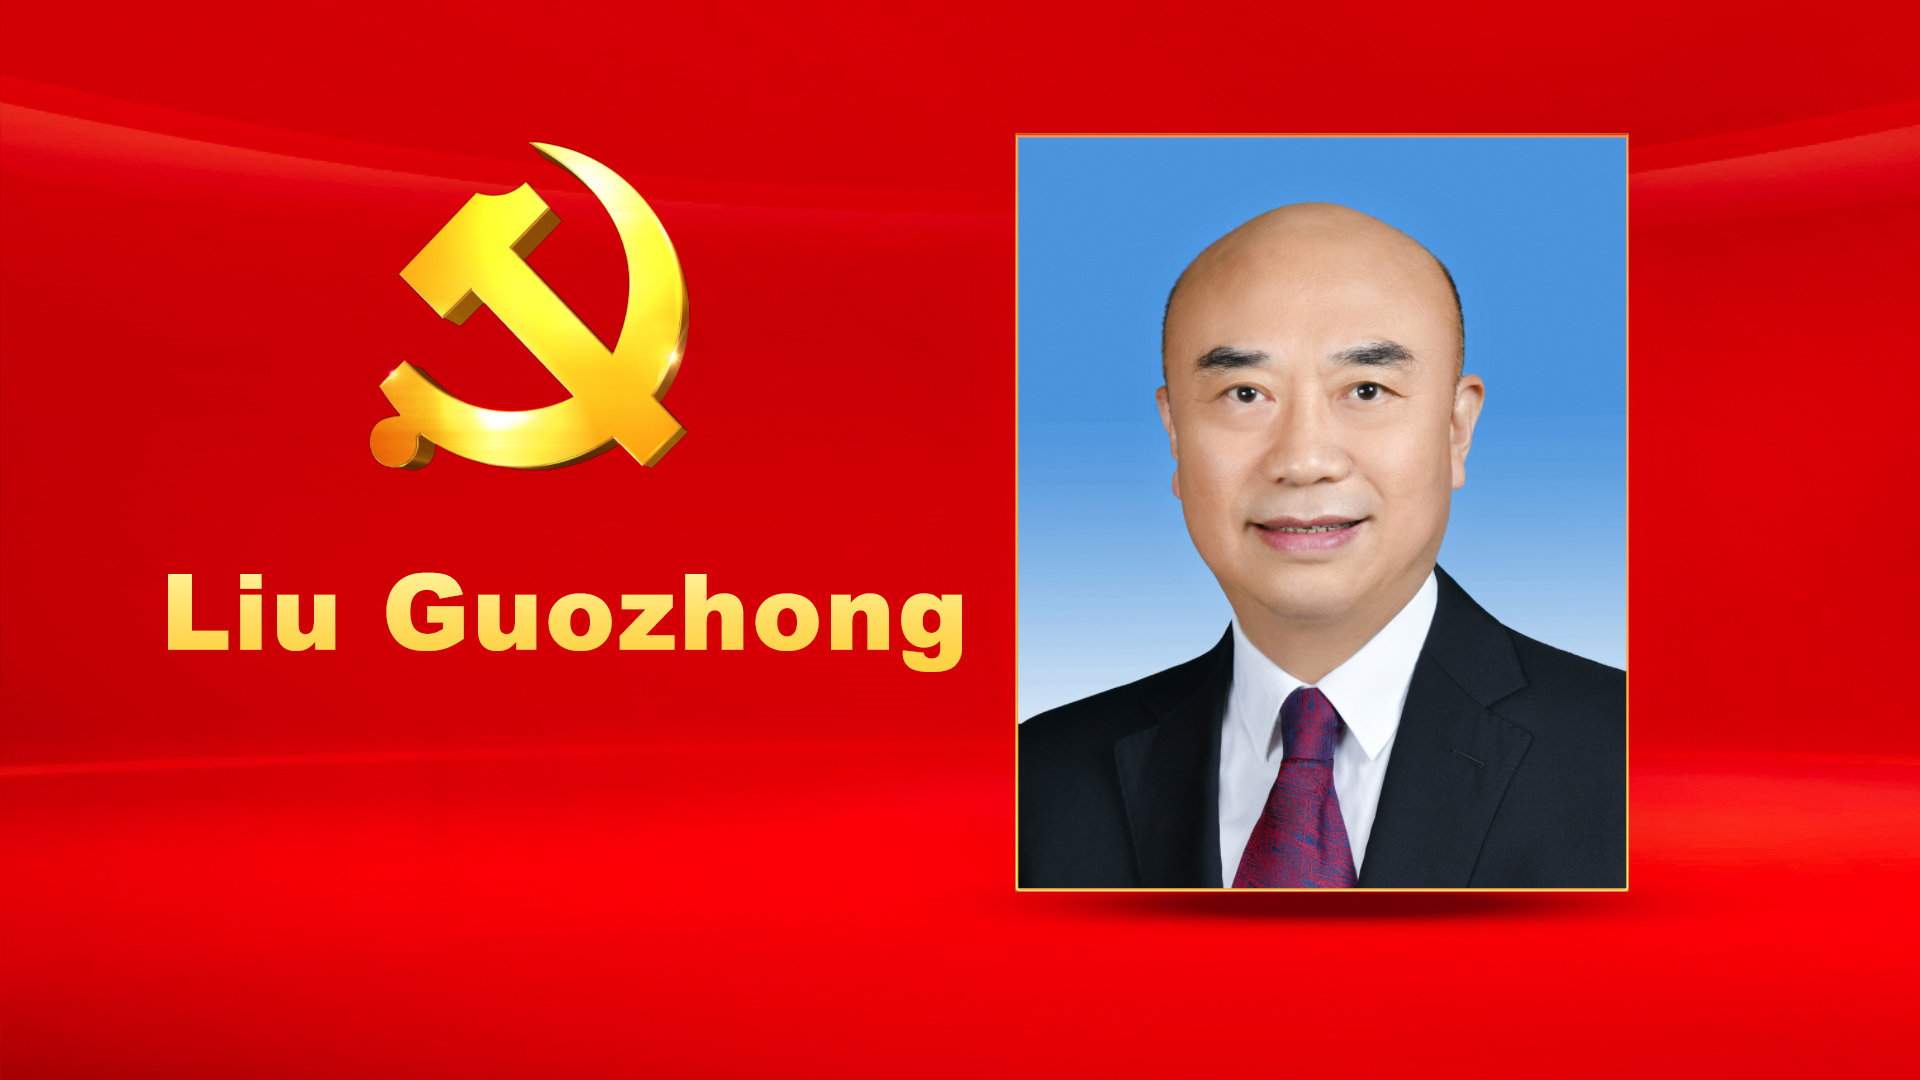 Liu Guozhong, male, Han ethnicity, was born in July 1962 and is from Wangkui, Heilongjiang Province. He began his first job in August 1982 and joined the Communist Party of China (CPC) in November 1986. Liu graduated from Department of Metal Materials and Technology, Harbin Institute of Technology where he completed a graduate program in pressure processing. He holds a Master of Engineering degree and a professional title of assistant engineer. Liu is currently a member of the CPC Central Committee Political Bureau, Secretary of the CPC Shaanxi Provincial Committee, and Chairman of the Standing Committee of the Shaanxi Provincial People's Congress.